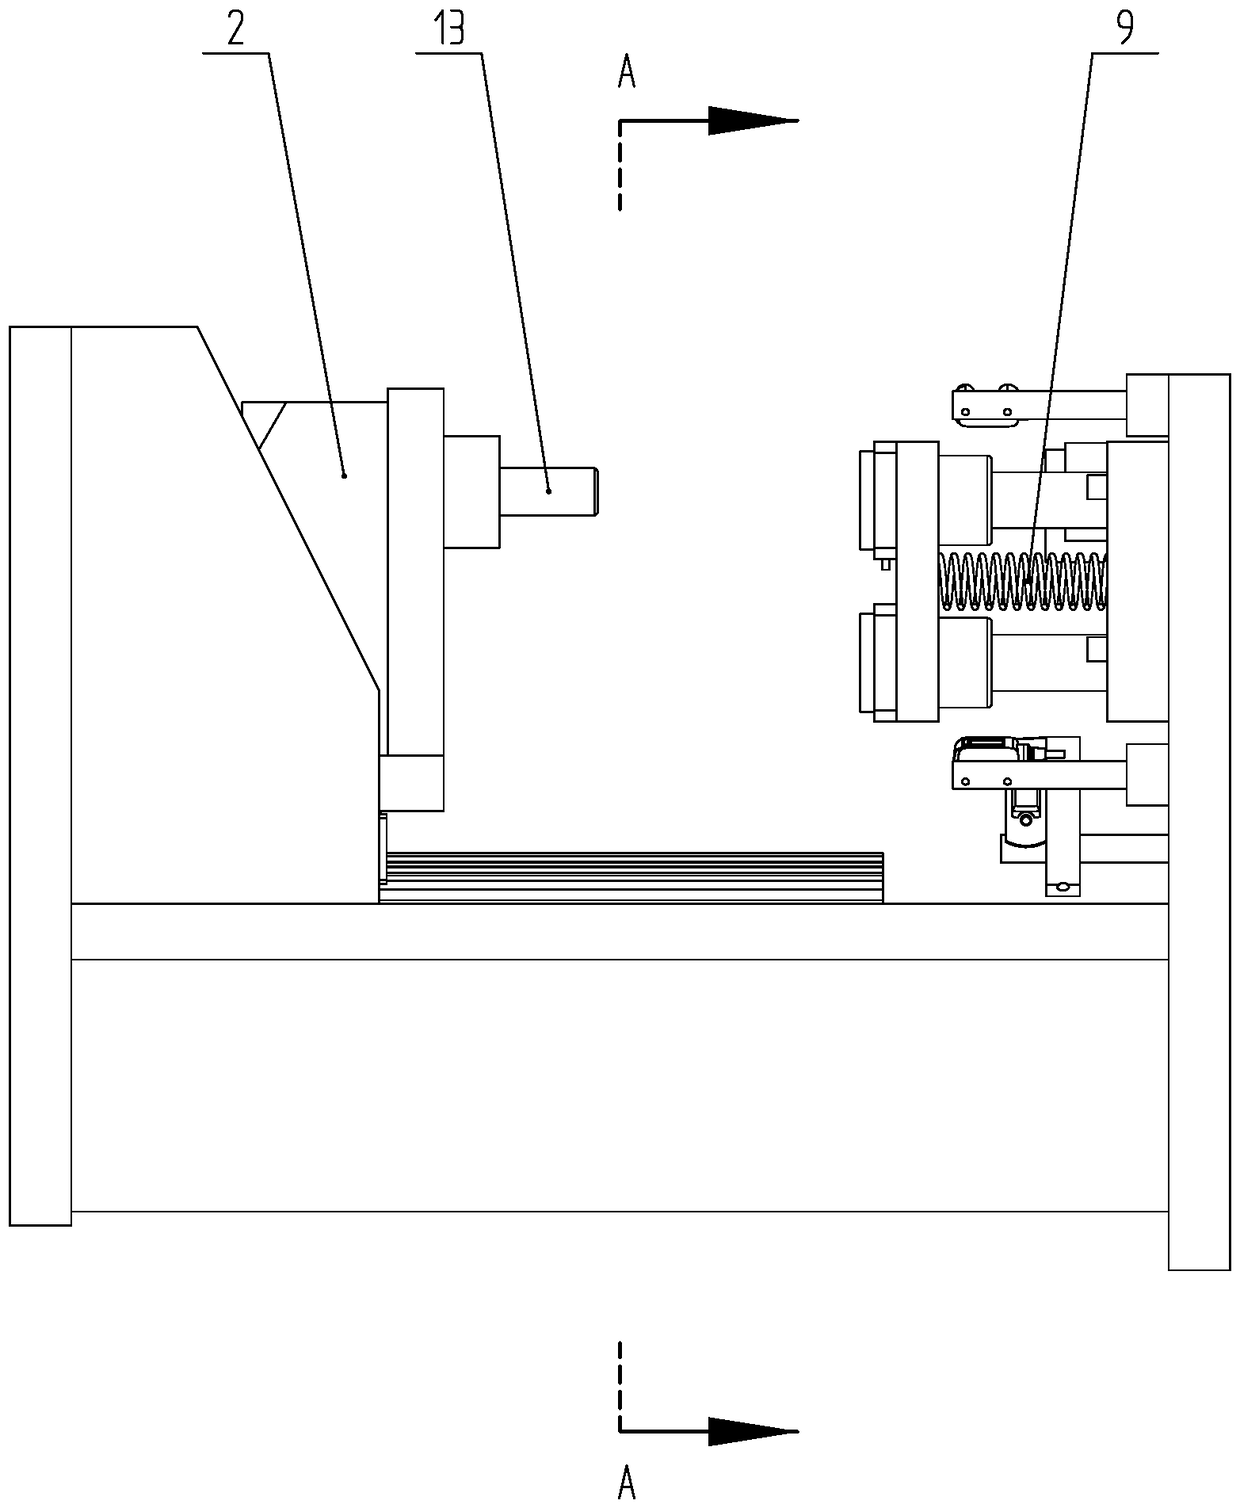 An automatic drilling machine with adjustable feed rate